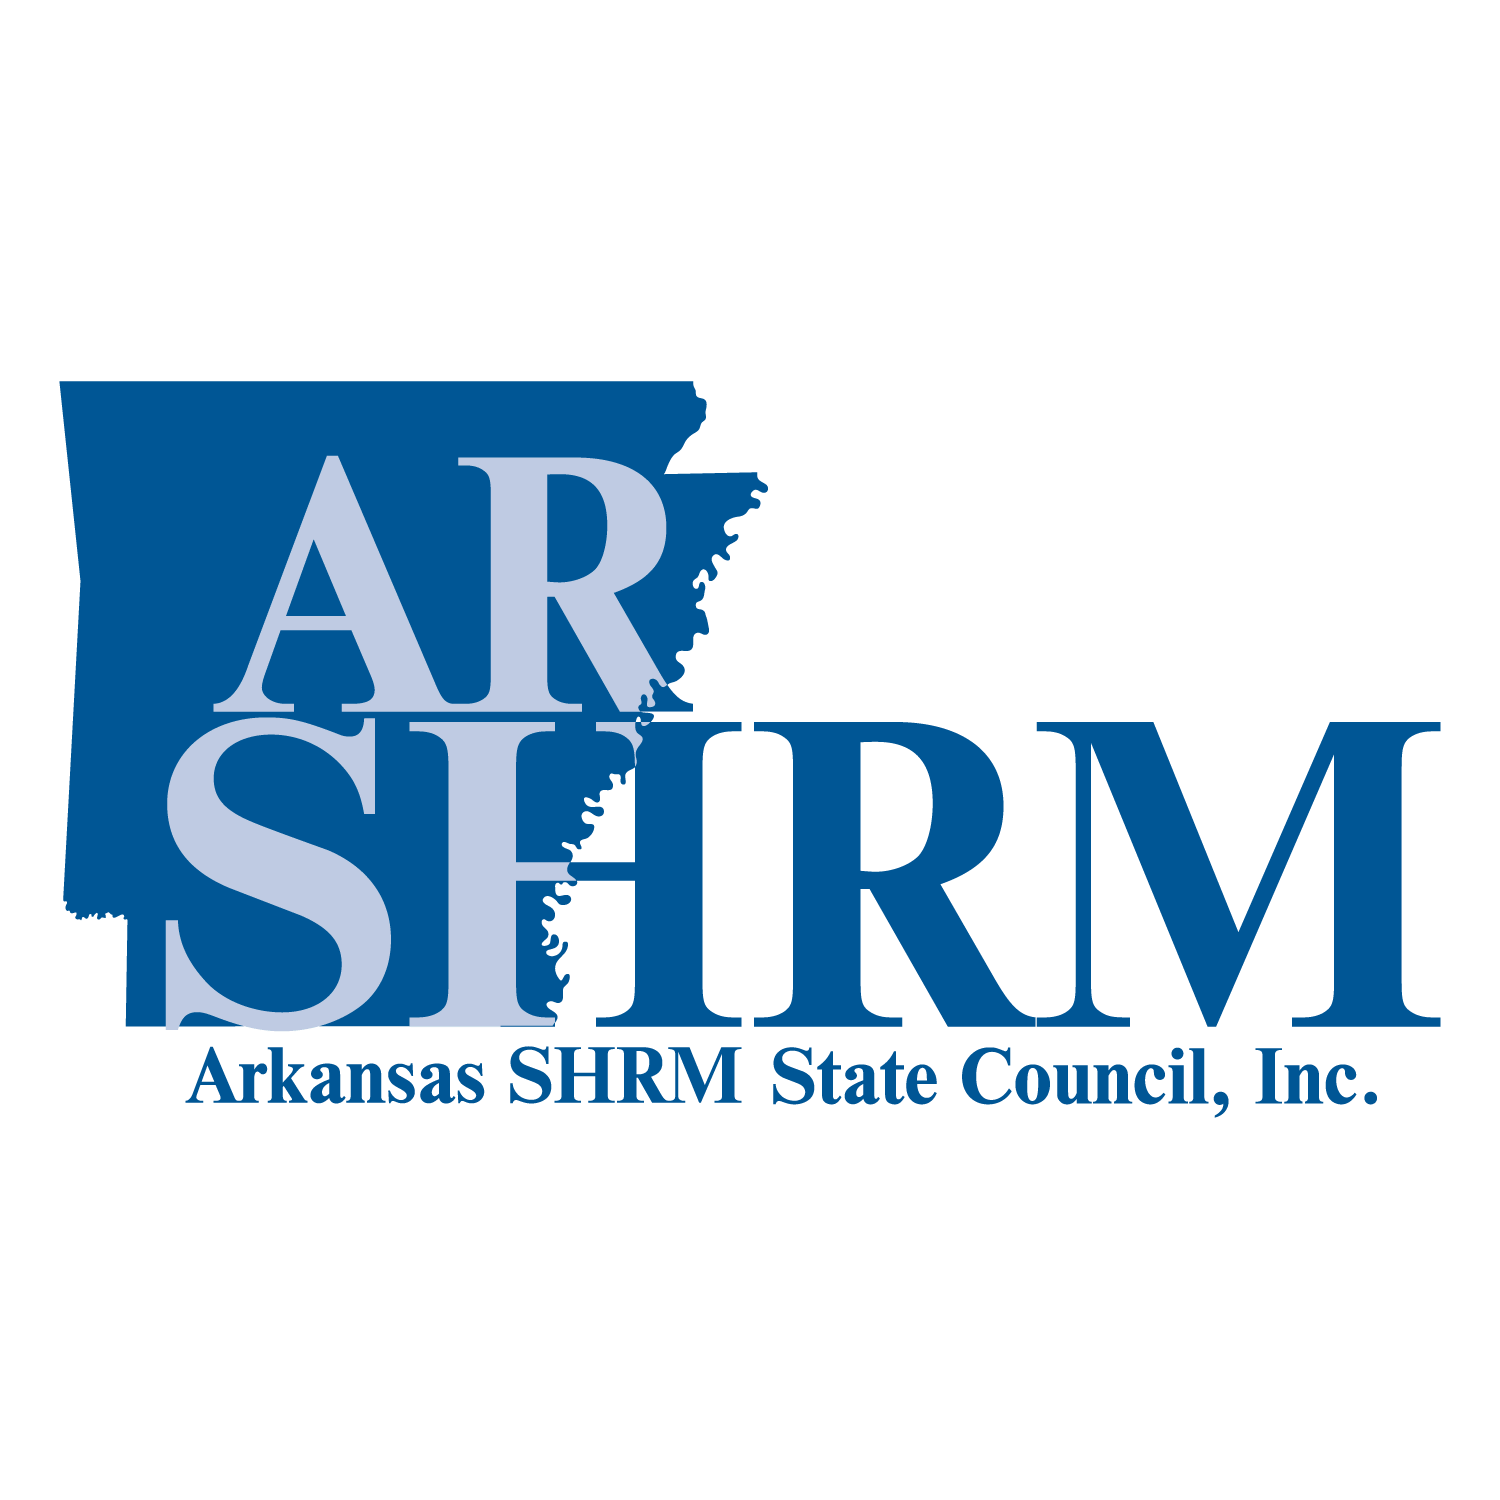 The Arkansas SHRM logo. A blue filled-in outline of Arkansas is behind AR and the "SH" of "SHRM," and underneath it says " Arkansas SHRM State Council, Inc.".